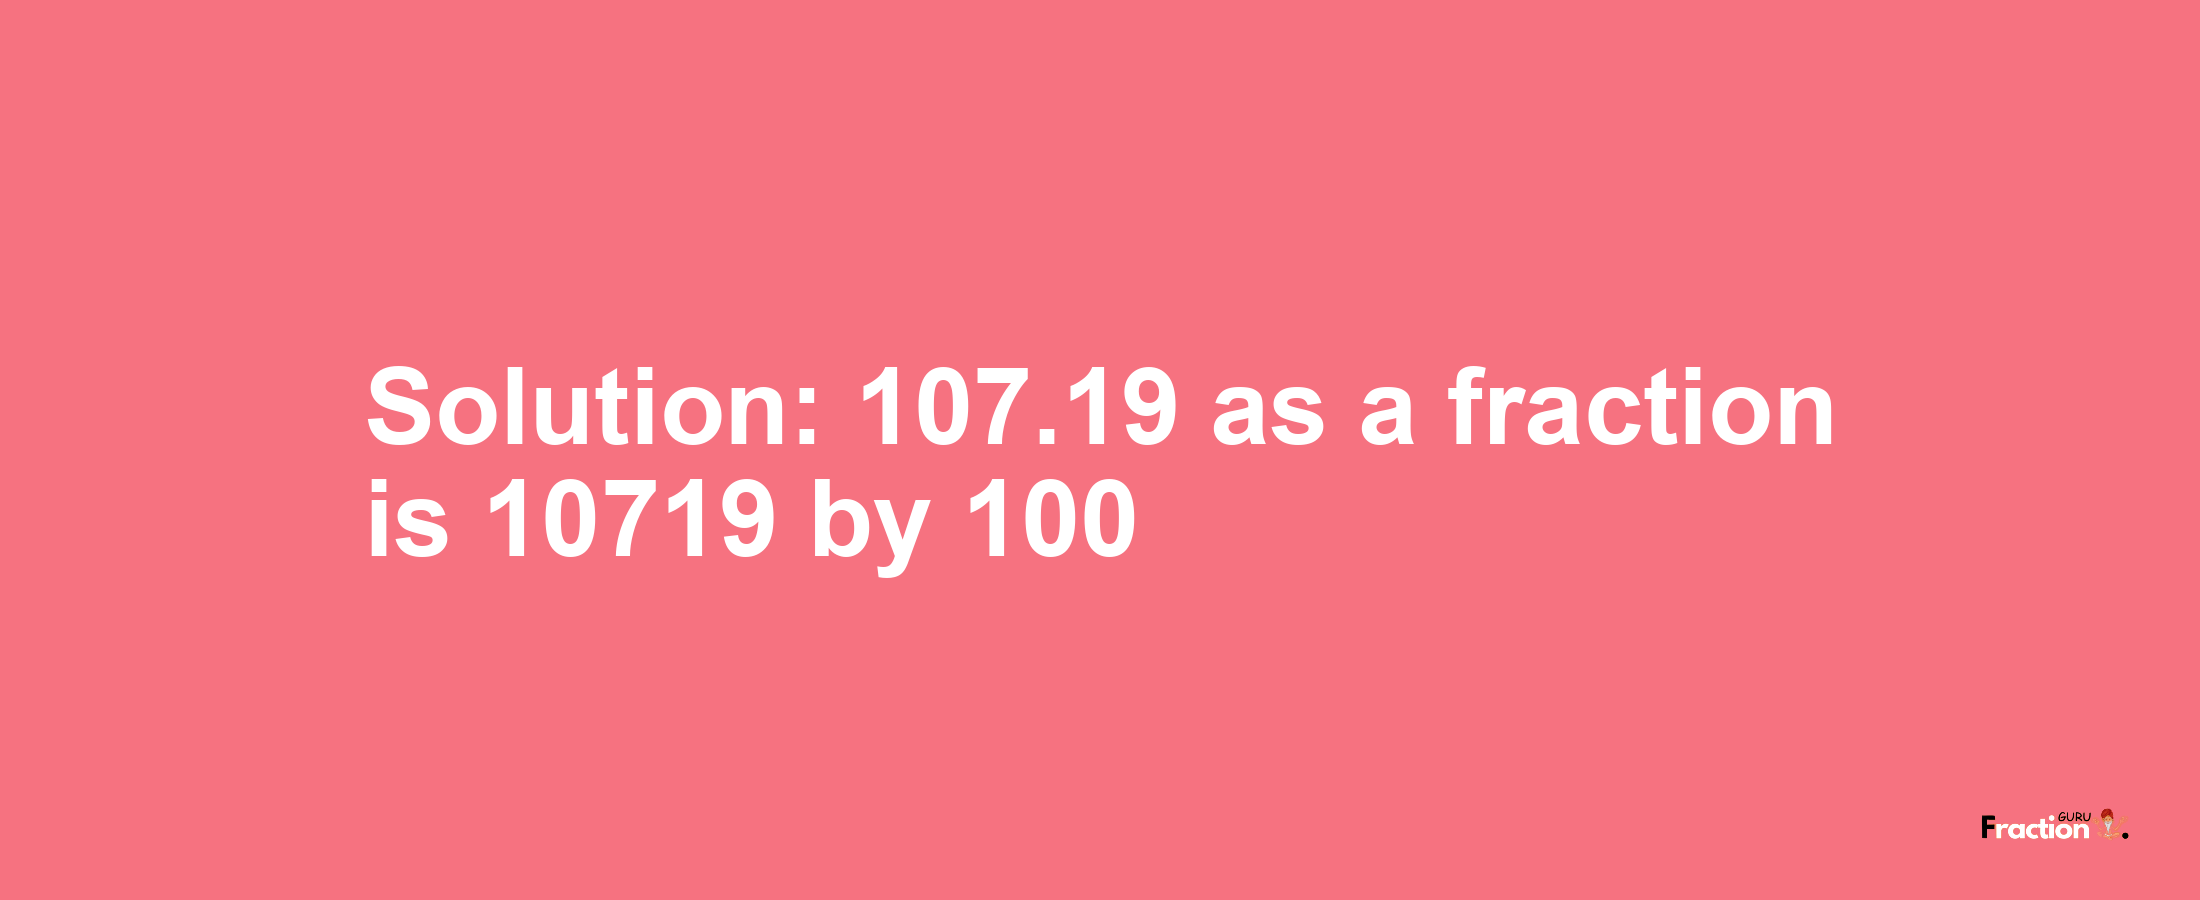 Solution:107.19 as a fraction is 10719/100